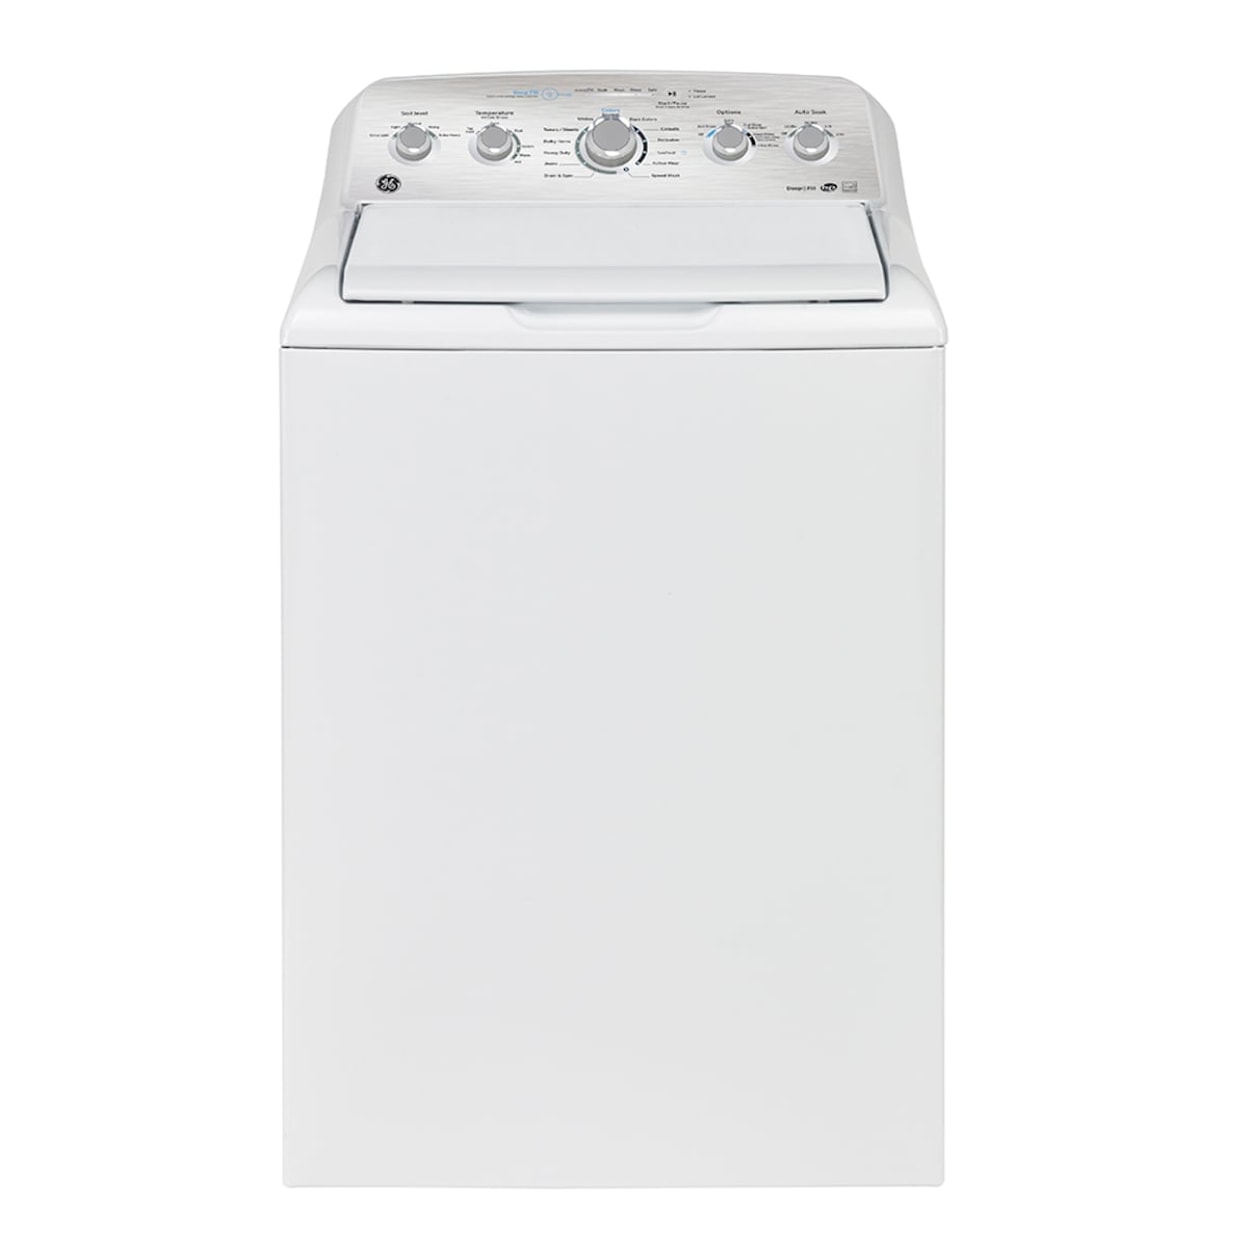 GE Appliances GE Appliances Top Load Washer